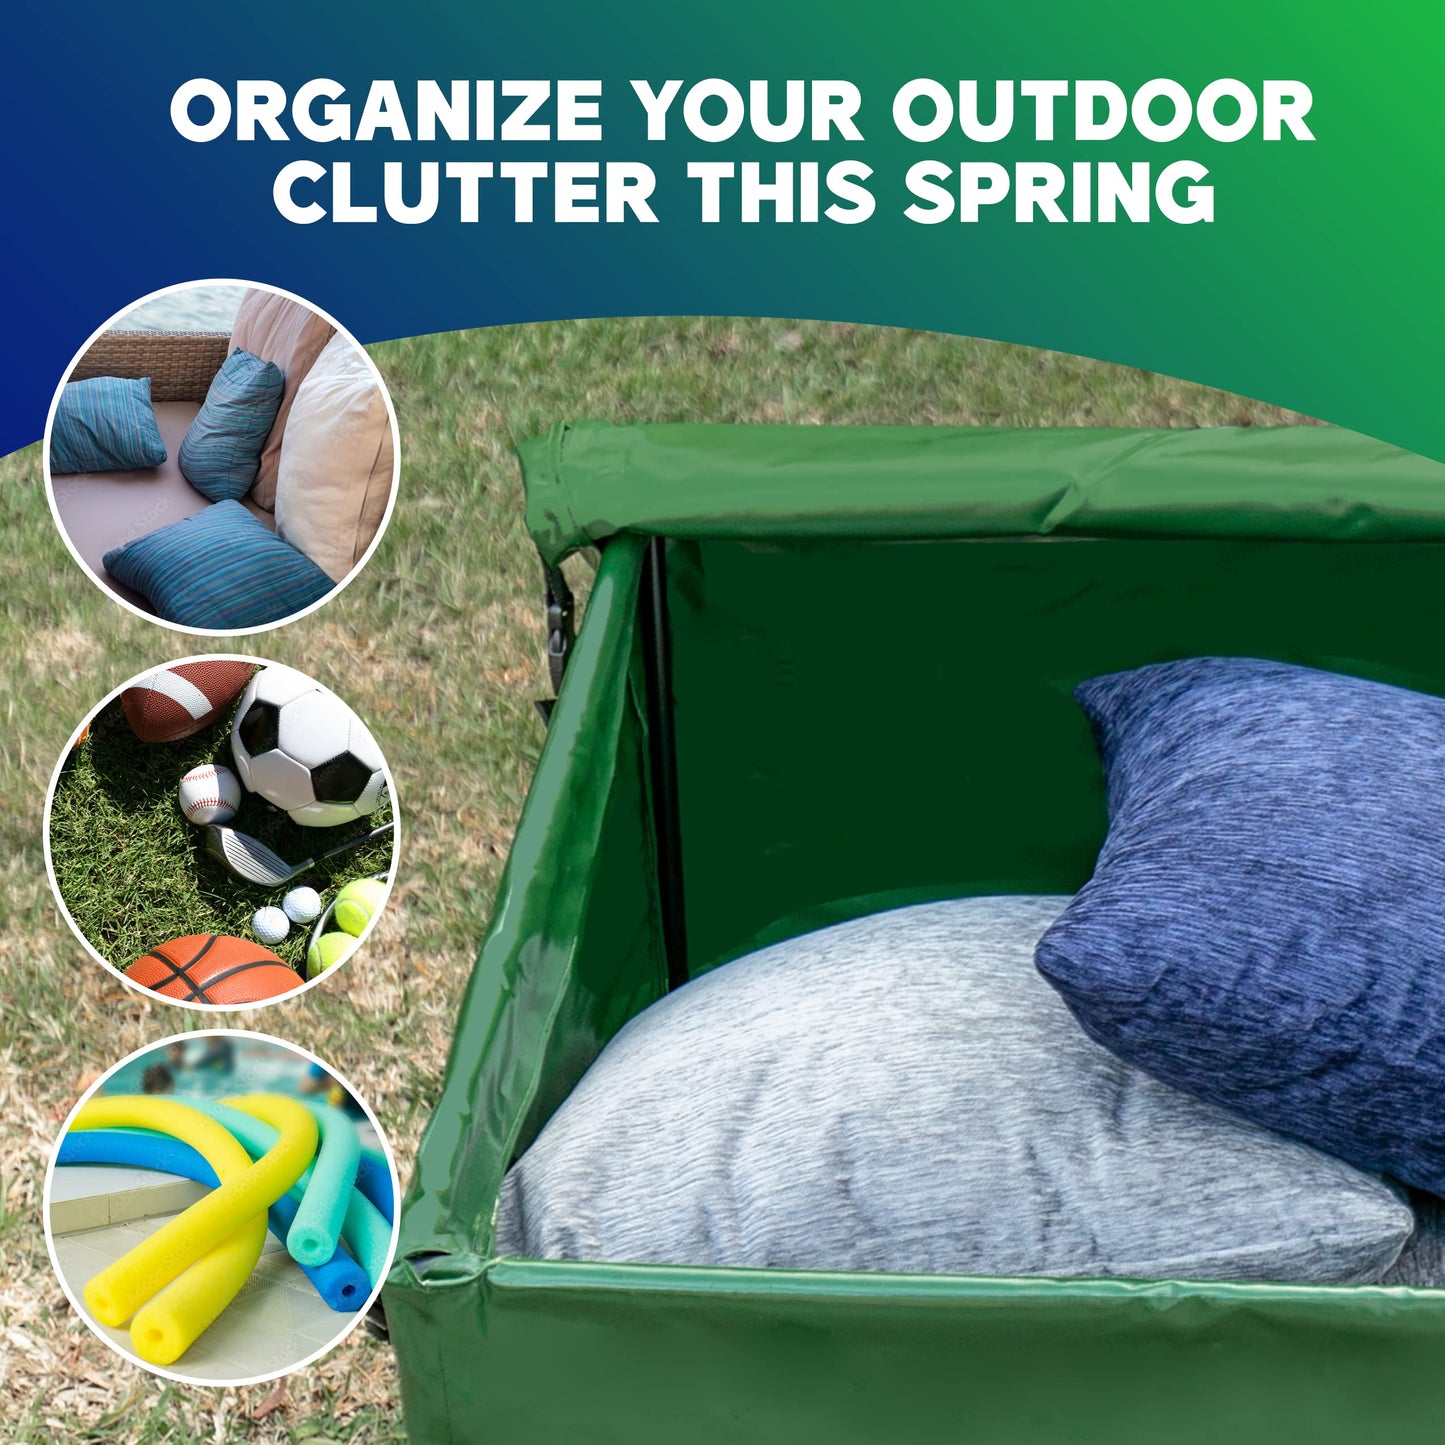 YardStash Outdoor Storage Box (Waterproof) - Heavy Duty, Portable, All Weather Tarpaulin Deck Box - Protects from Rain, Wind, Sun & Snow - Perfect for the Boat, Yard, Patio, or Camping – XL Green